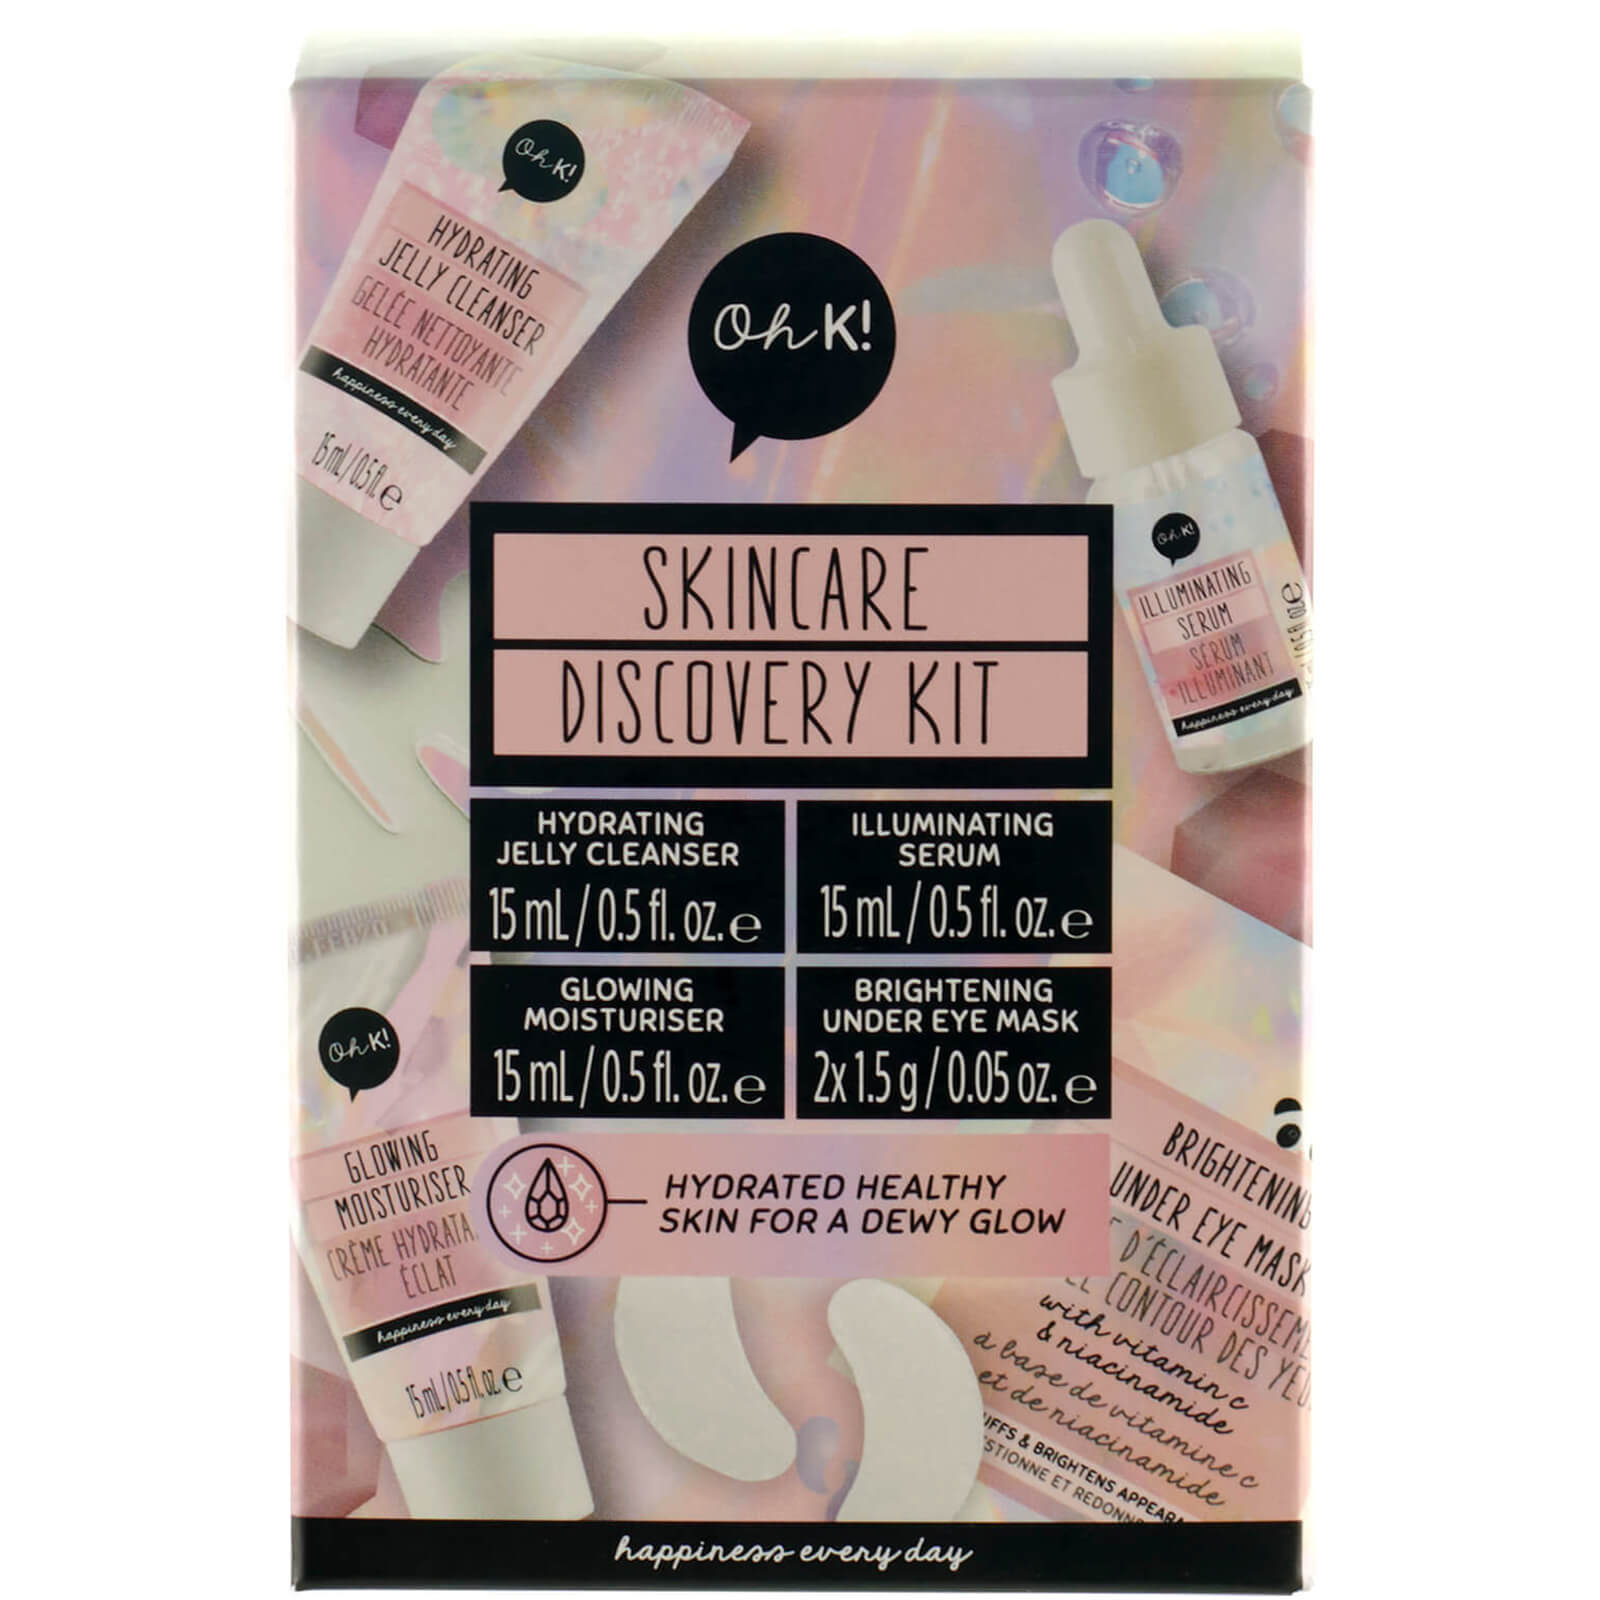 oh k! skincare discovery kit